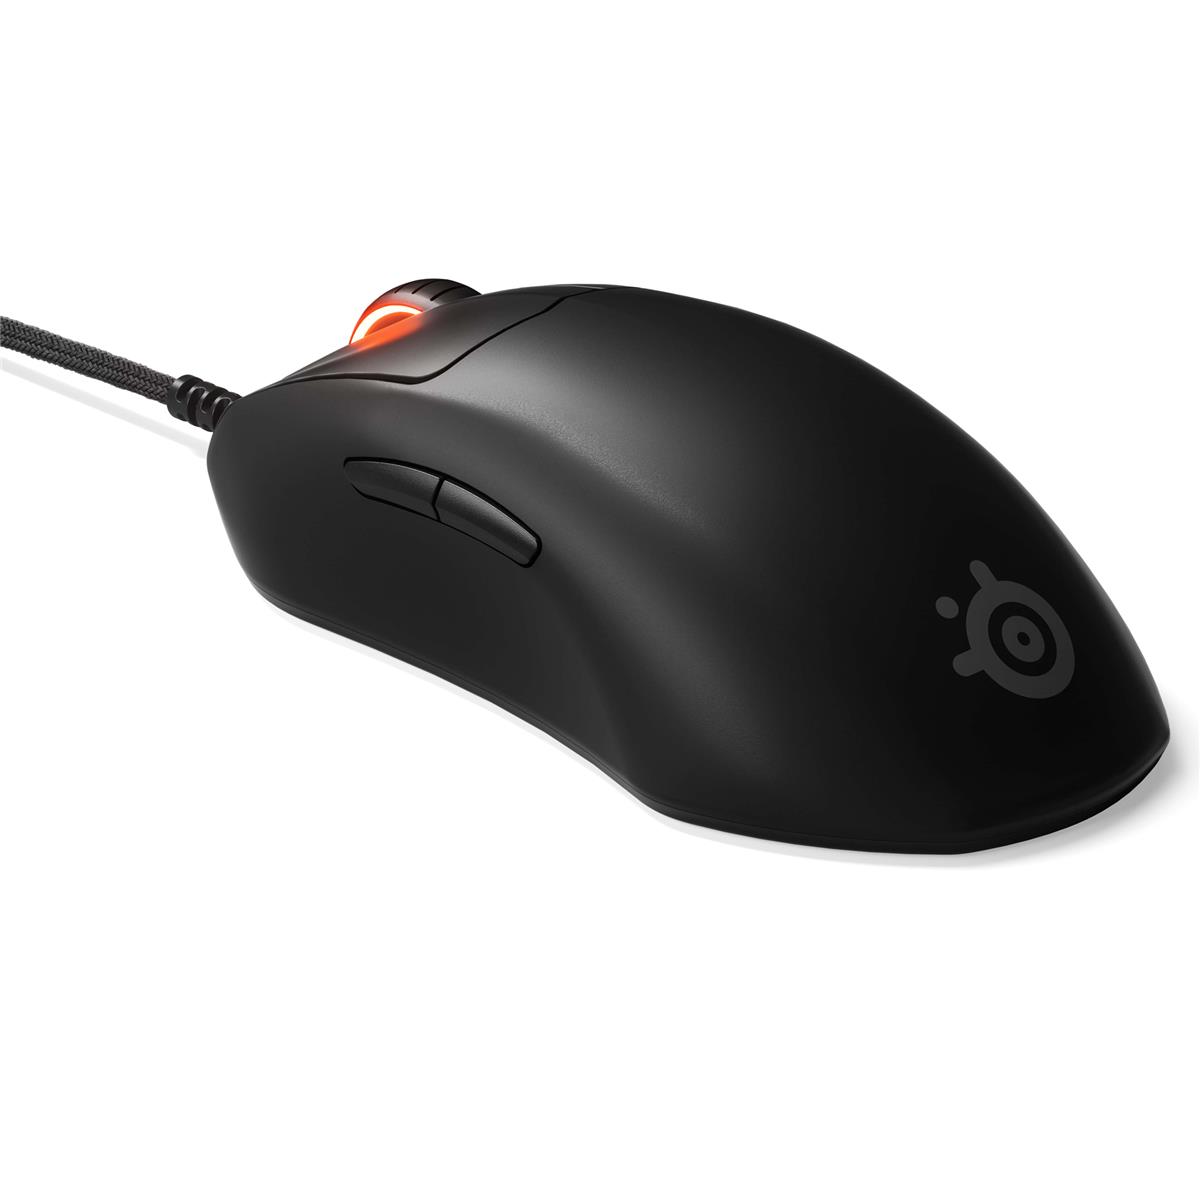 SteelSeries Prime+ FPS Wired Gaming Mouse with Lift-Off Sensor